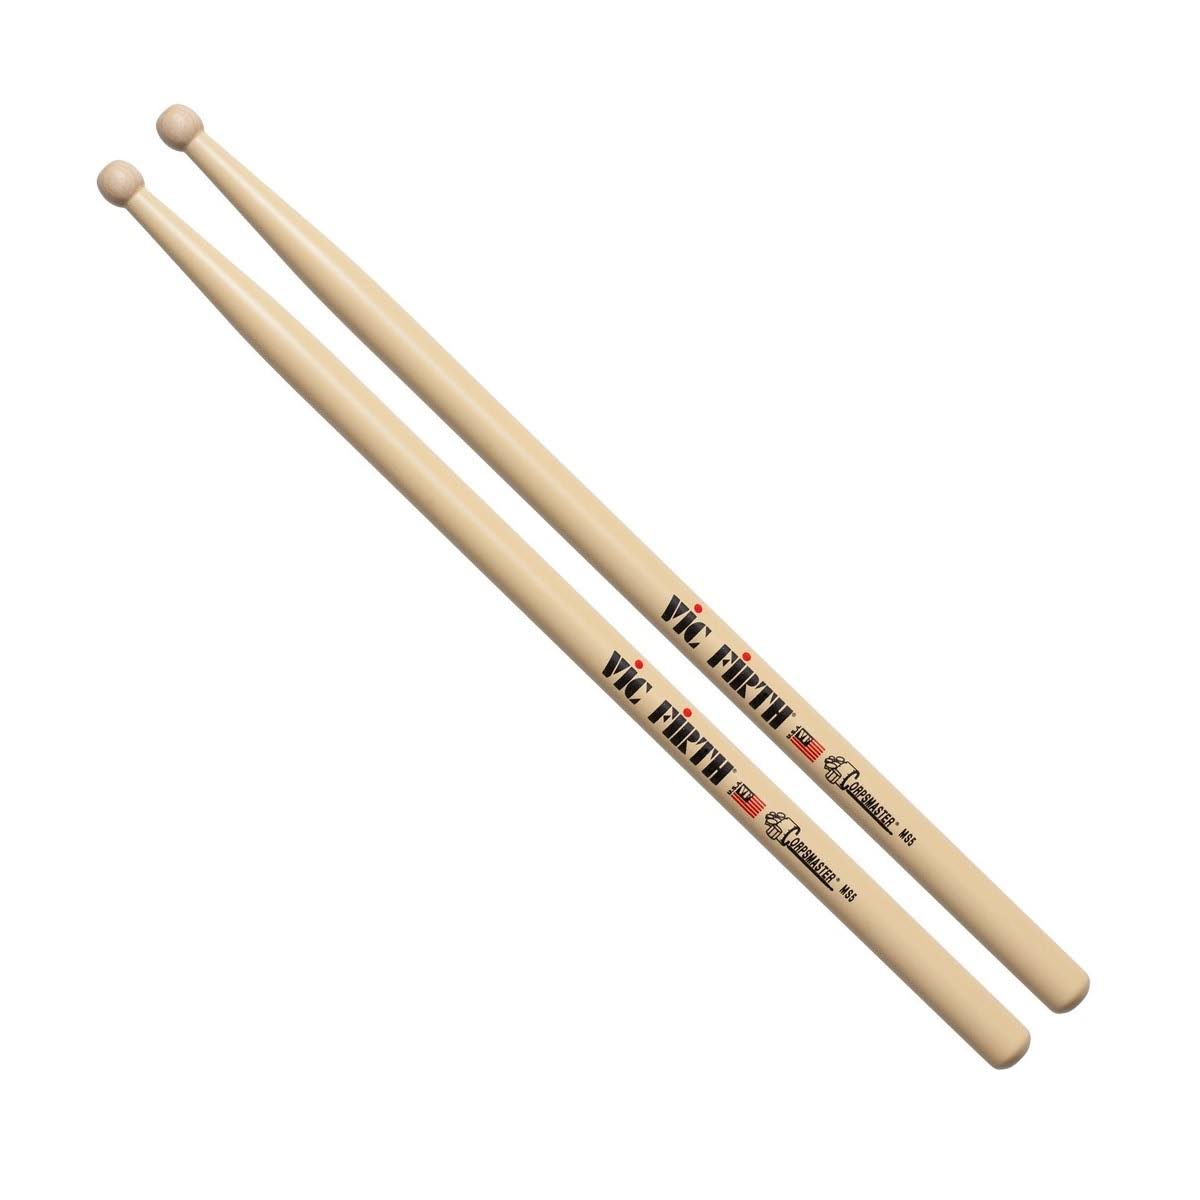 Vic Firth MS5 Corpsmaster Drumsticks - 17" x 0.71"